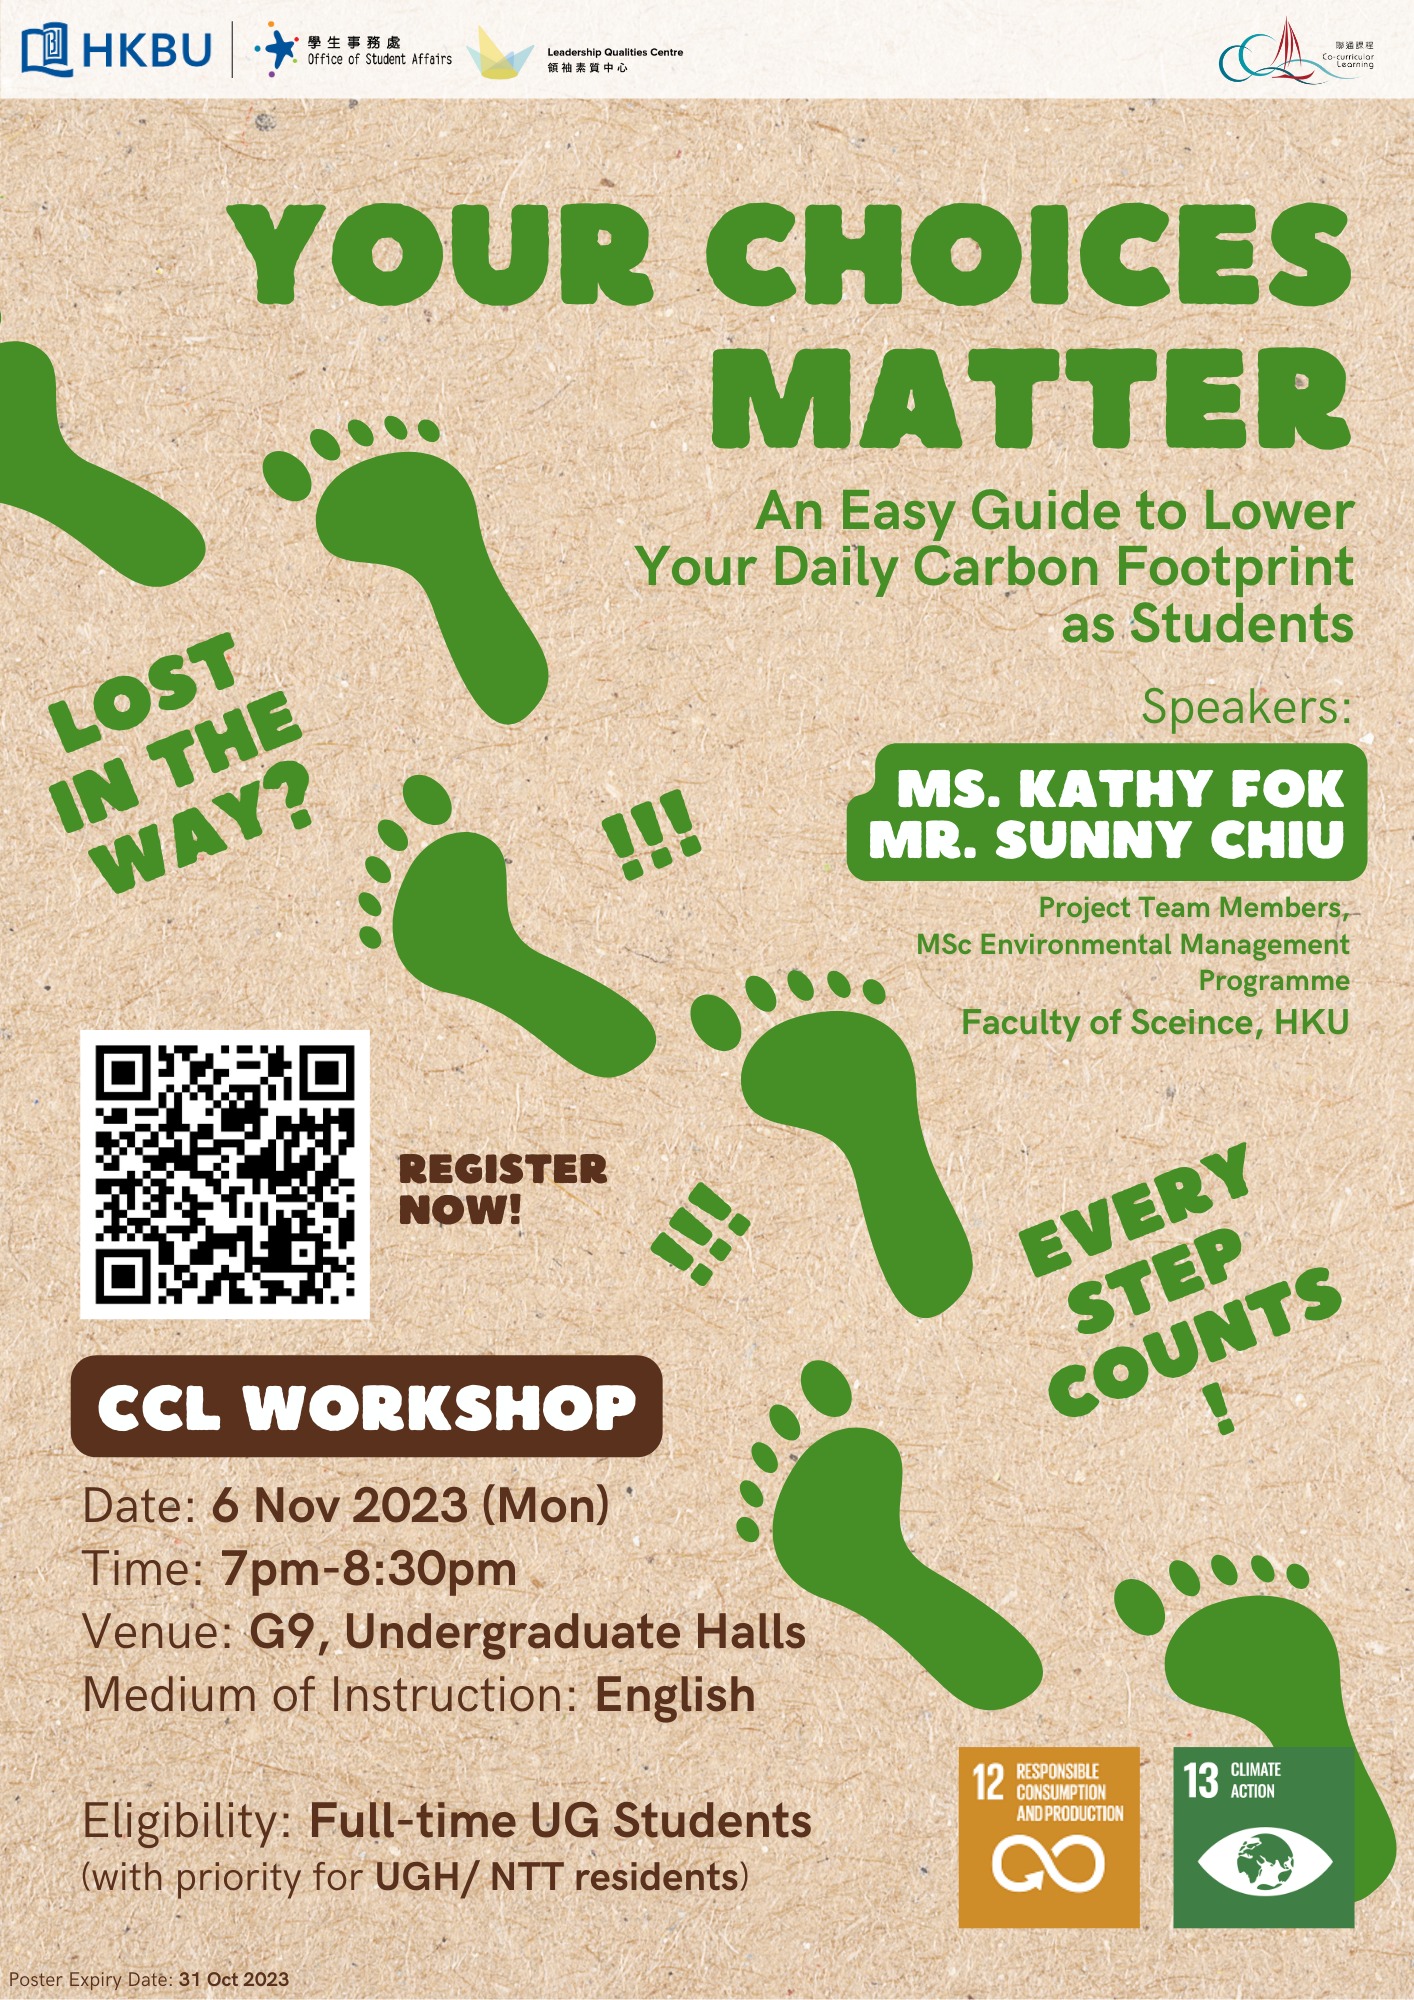 Our Choices Matter An Easy Guide to Lower Your Daily Carbon Footprint as Students_2023_SA